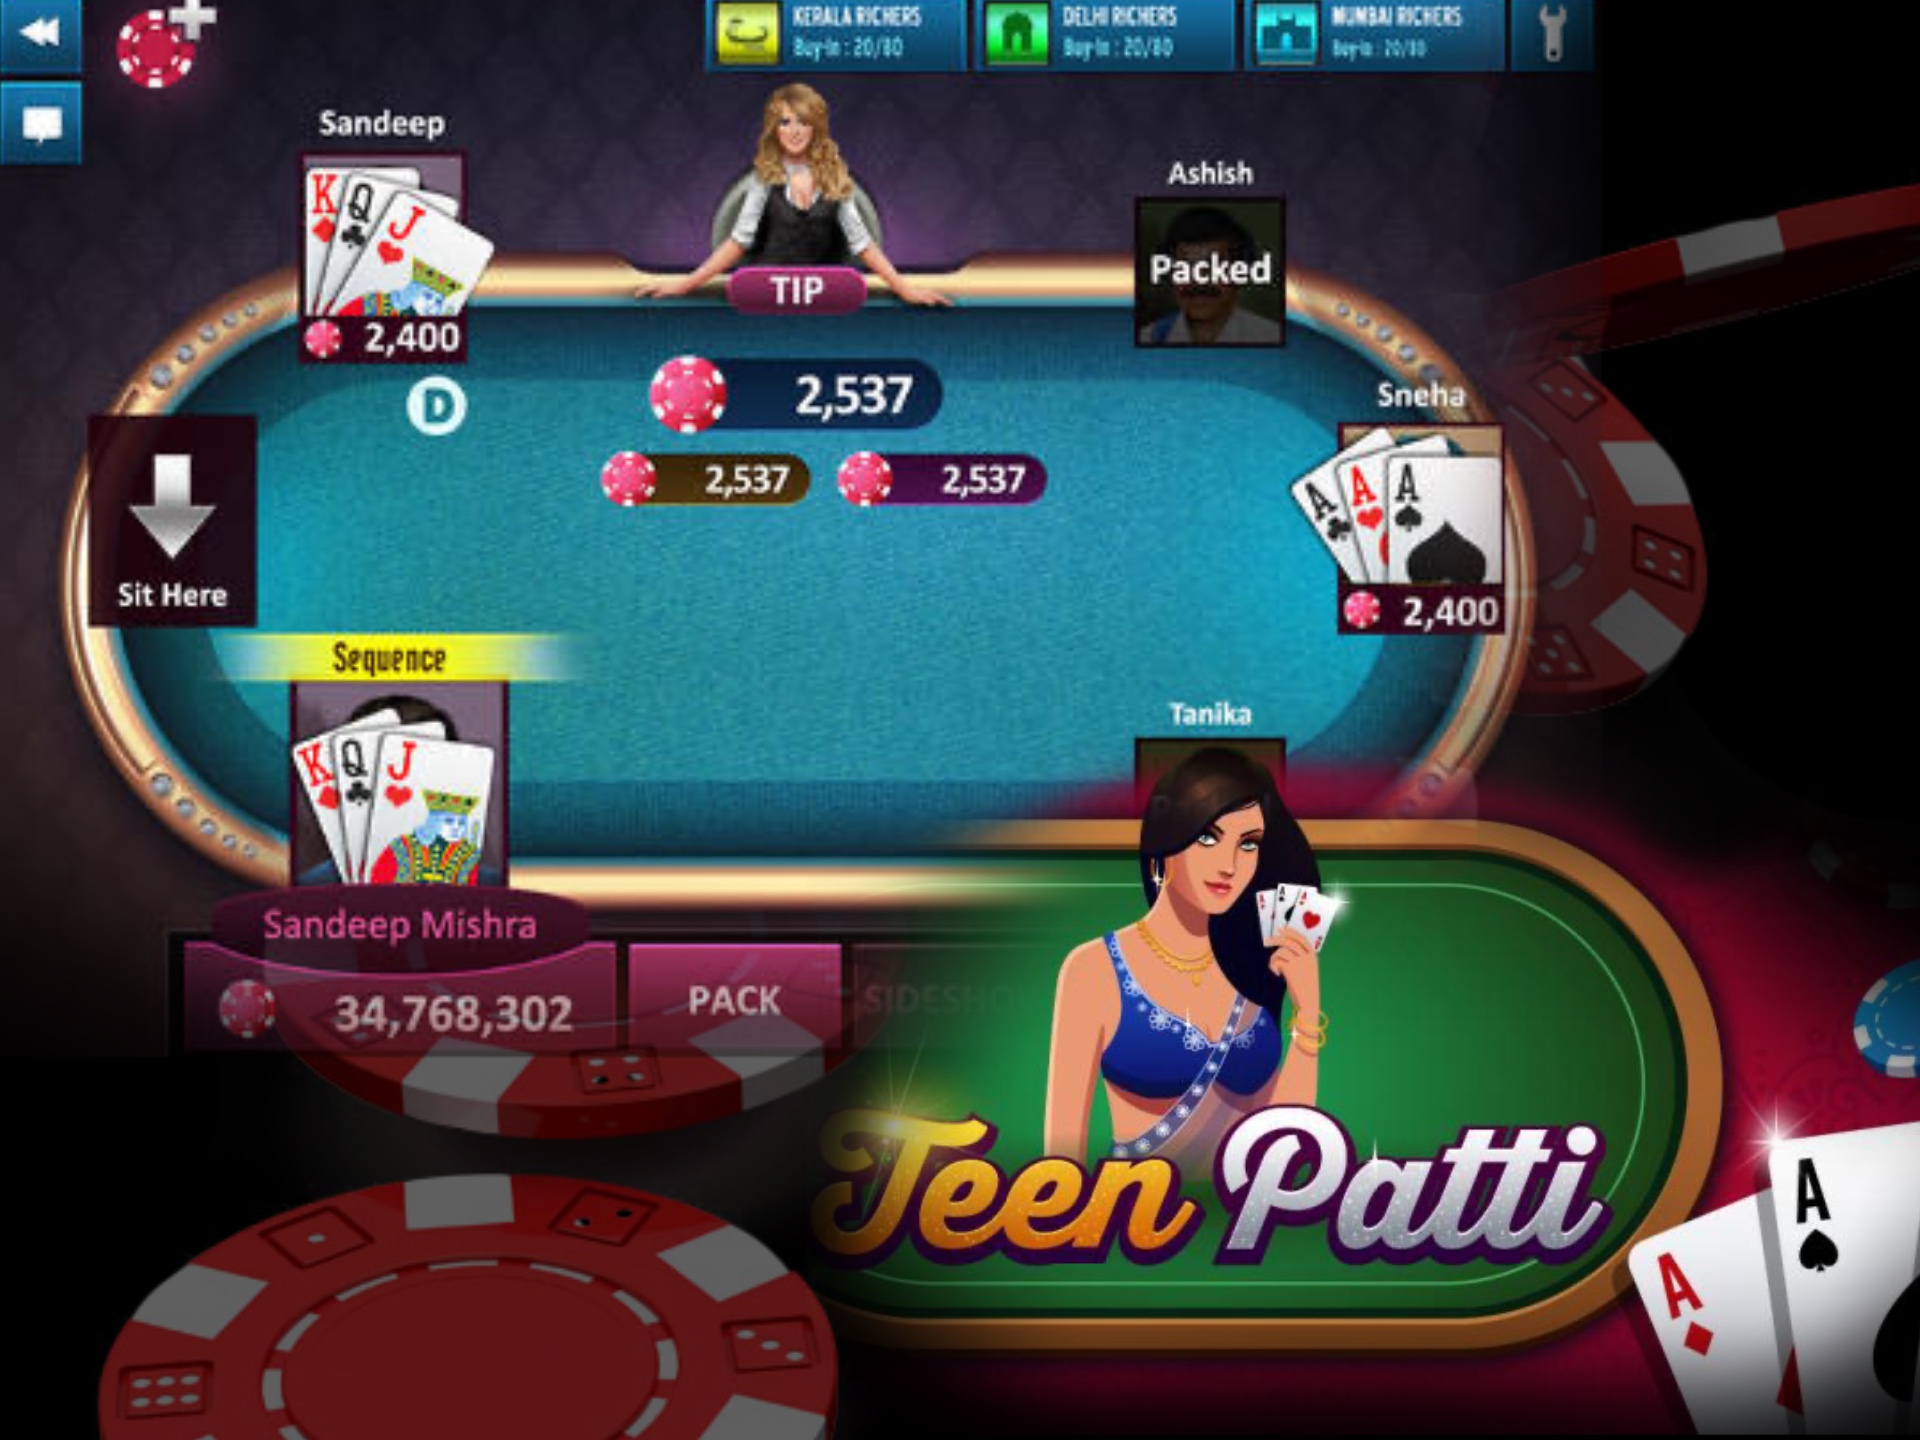 Play the most well-known traditional Indian game at an online casino.